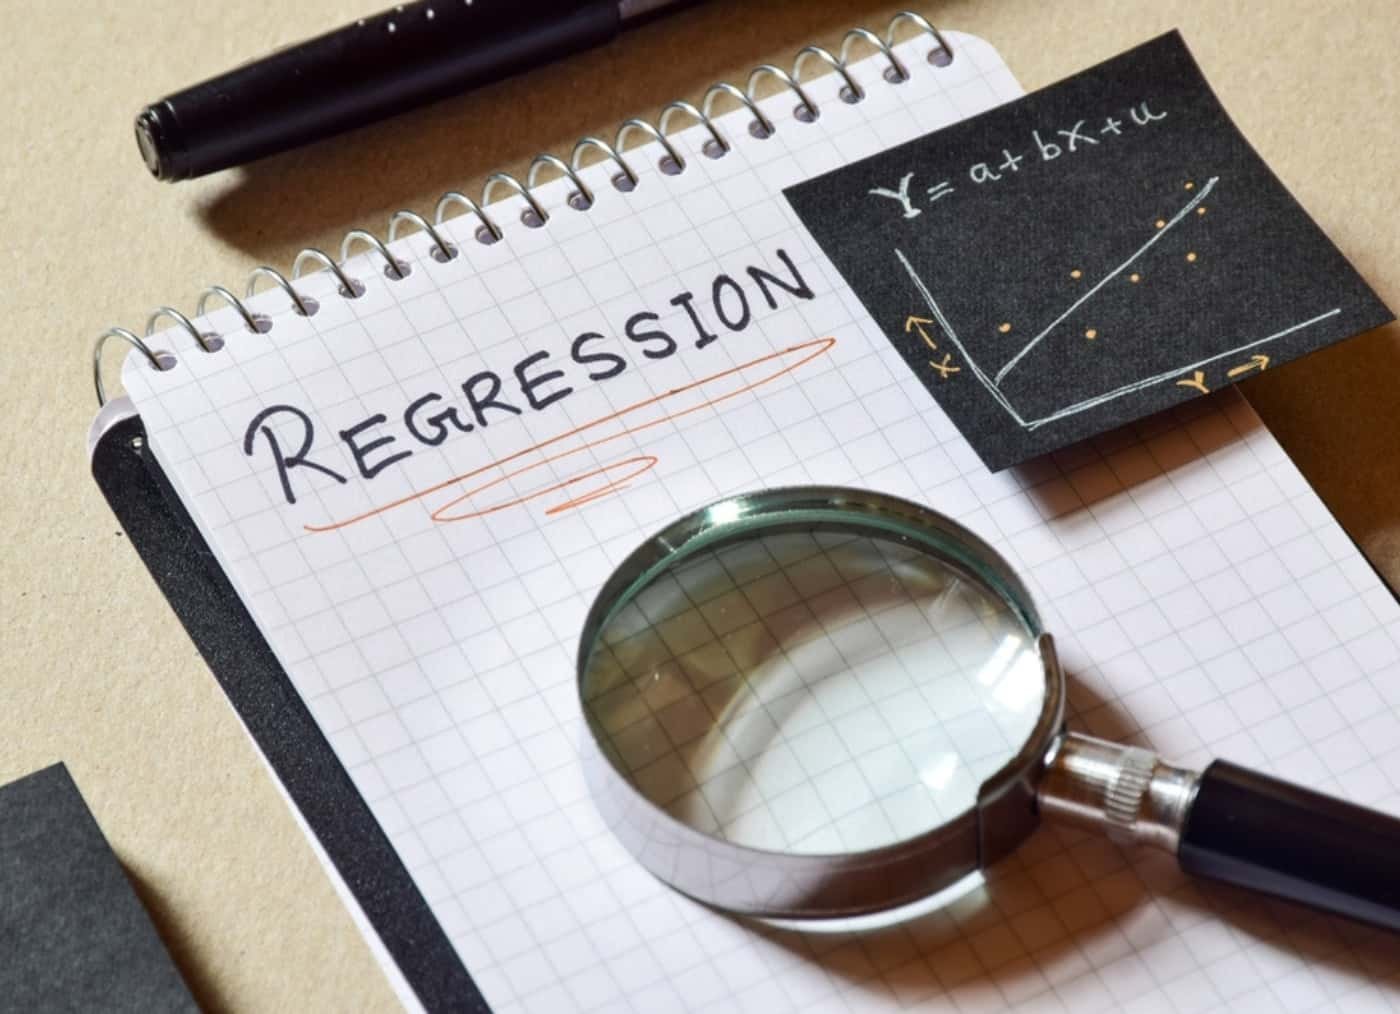 regression in machine learning